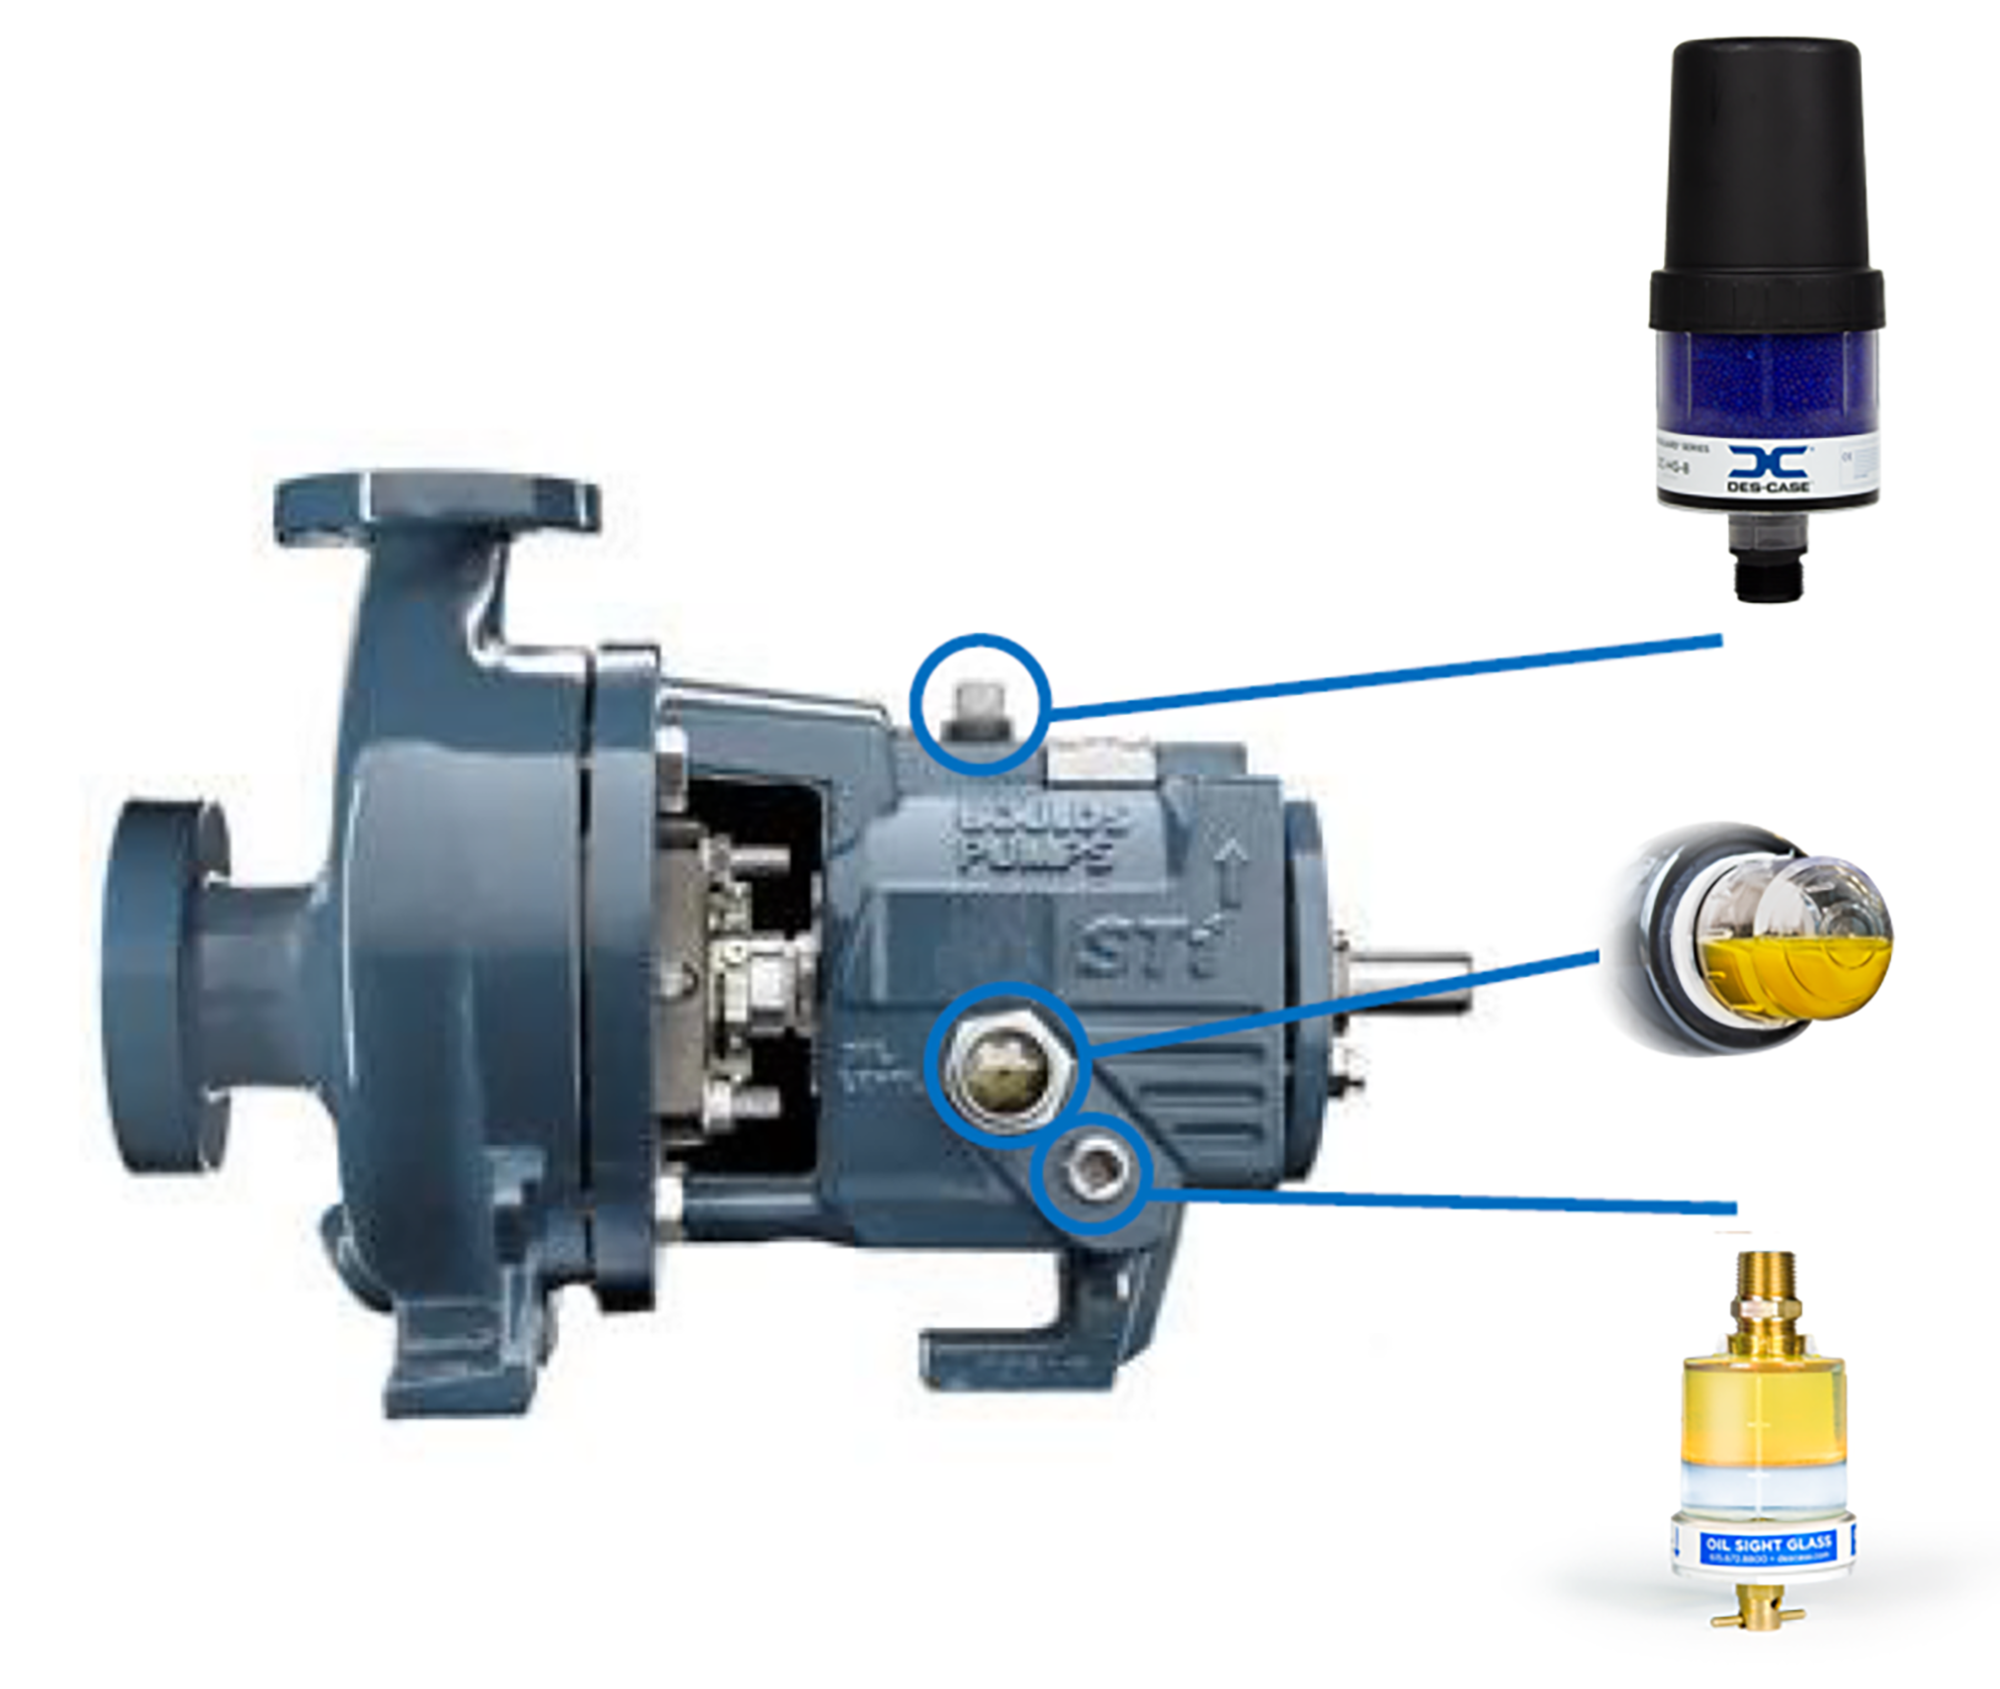 IMAGE 1: Ideal configuration for visually inspecting a pump (Images courtesy of Des-Case)